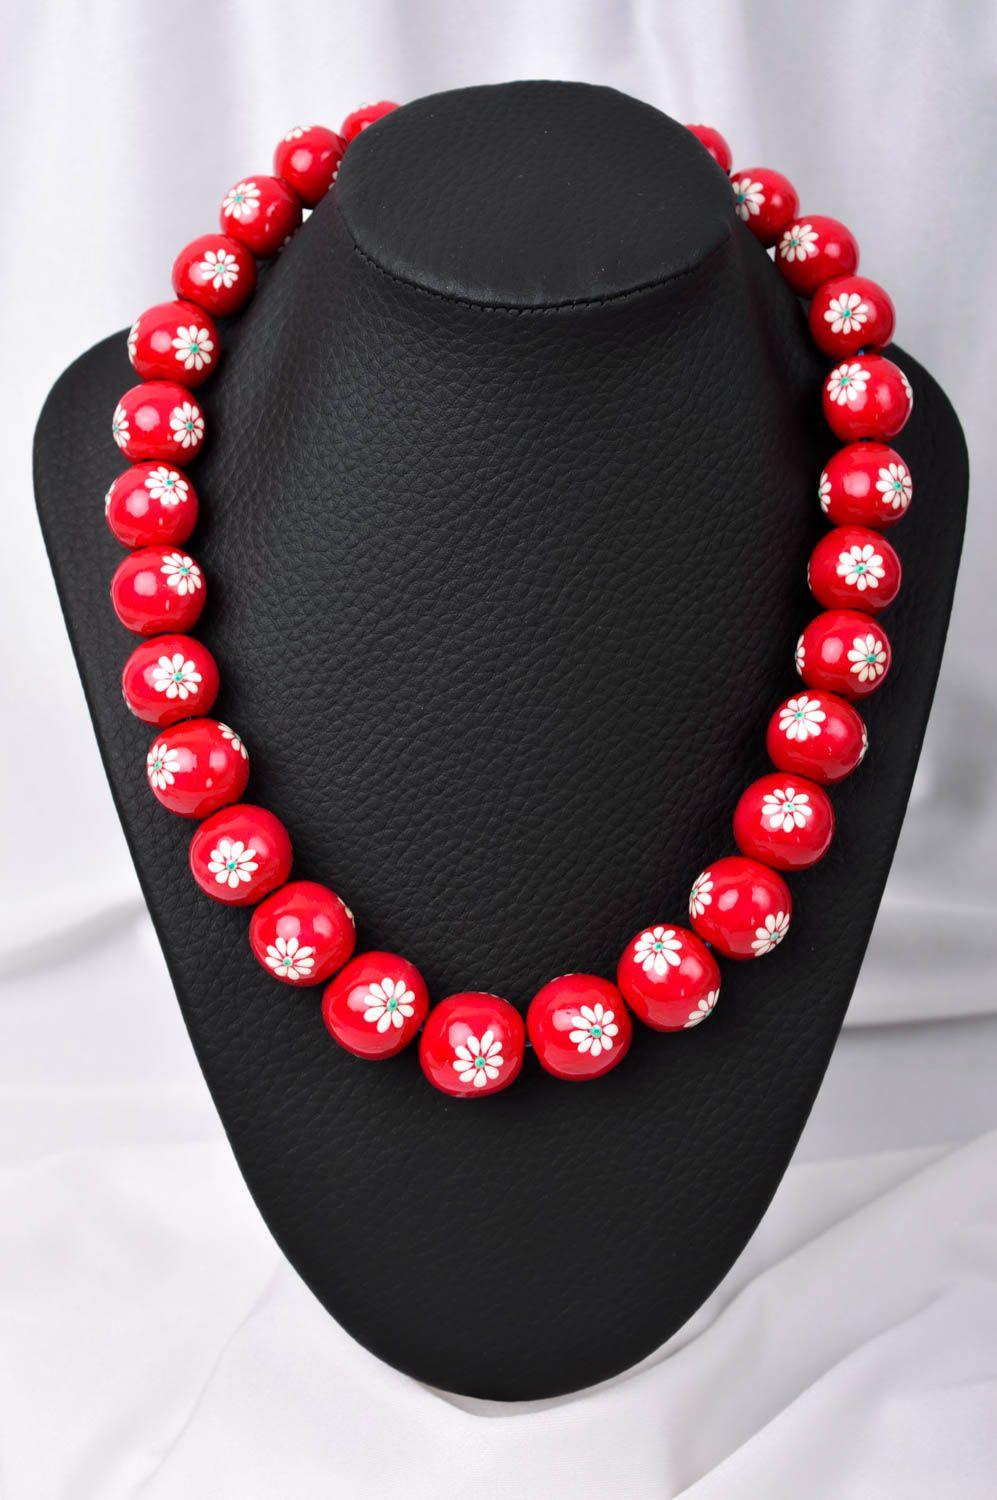 Handmade jewelry plastic necklace long necklace bead necklace gifts for women photo 1